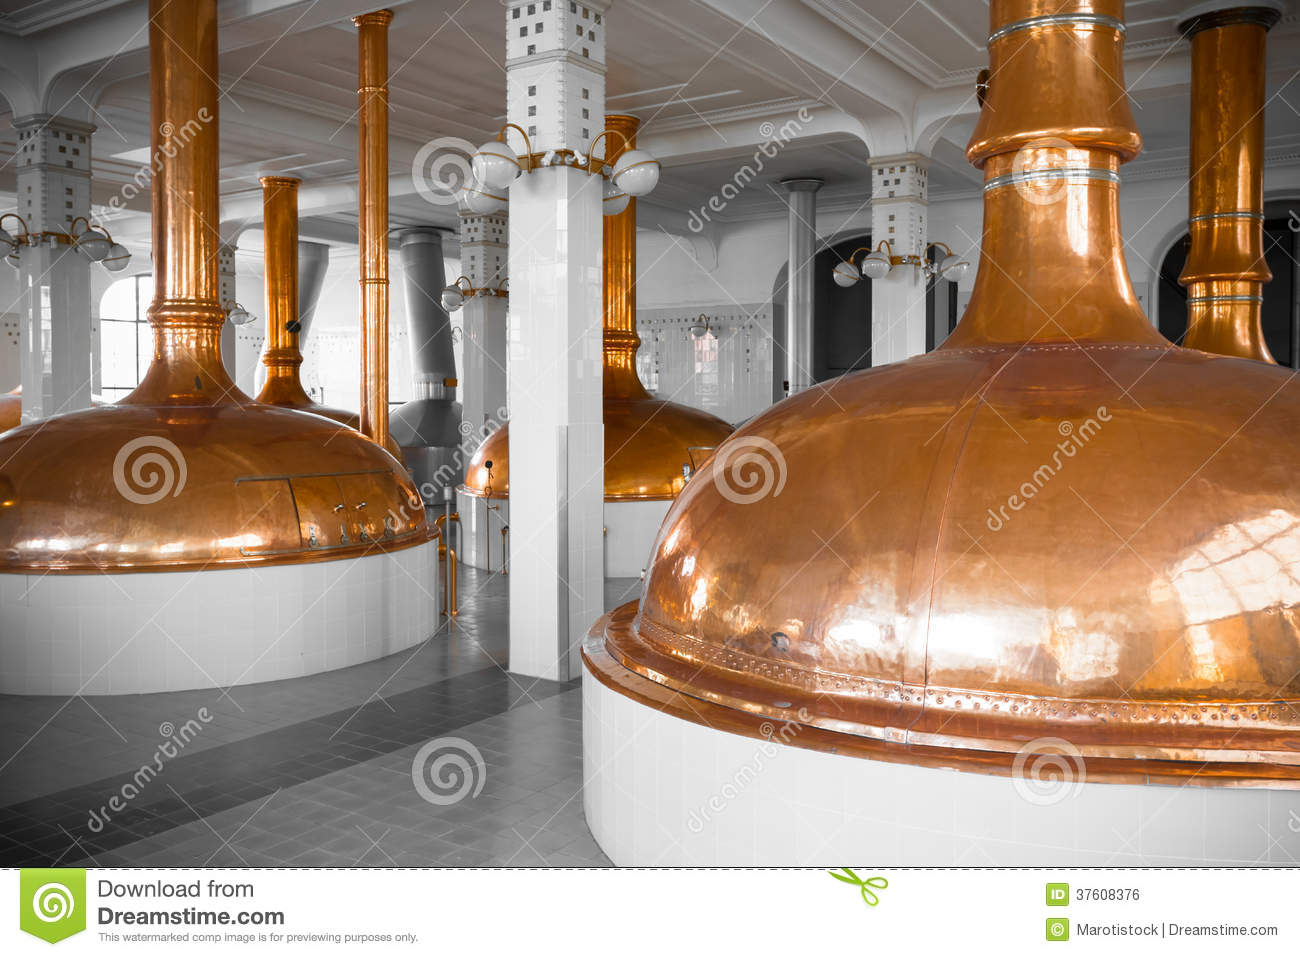 Brewery Building Interior Royalty Free Stock Image   Image  37608376